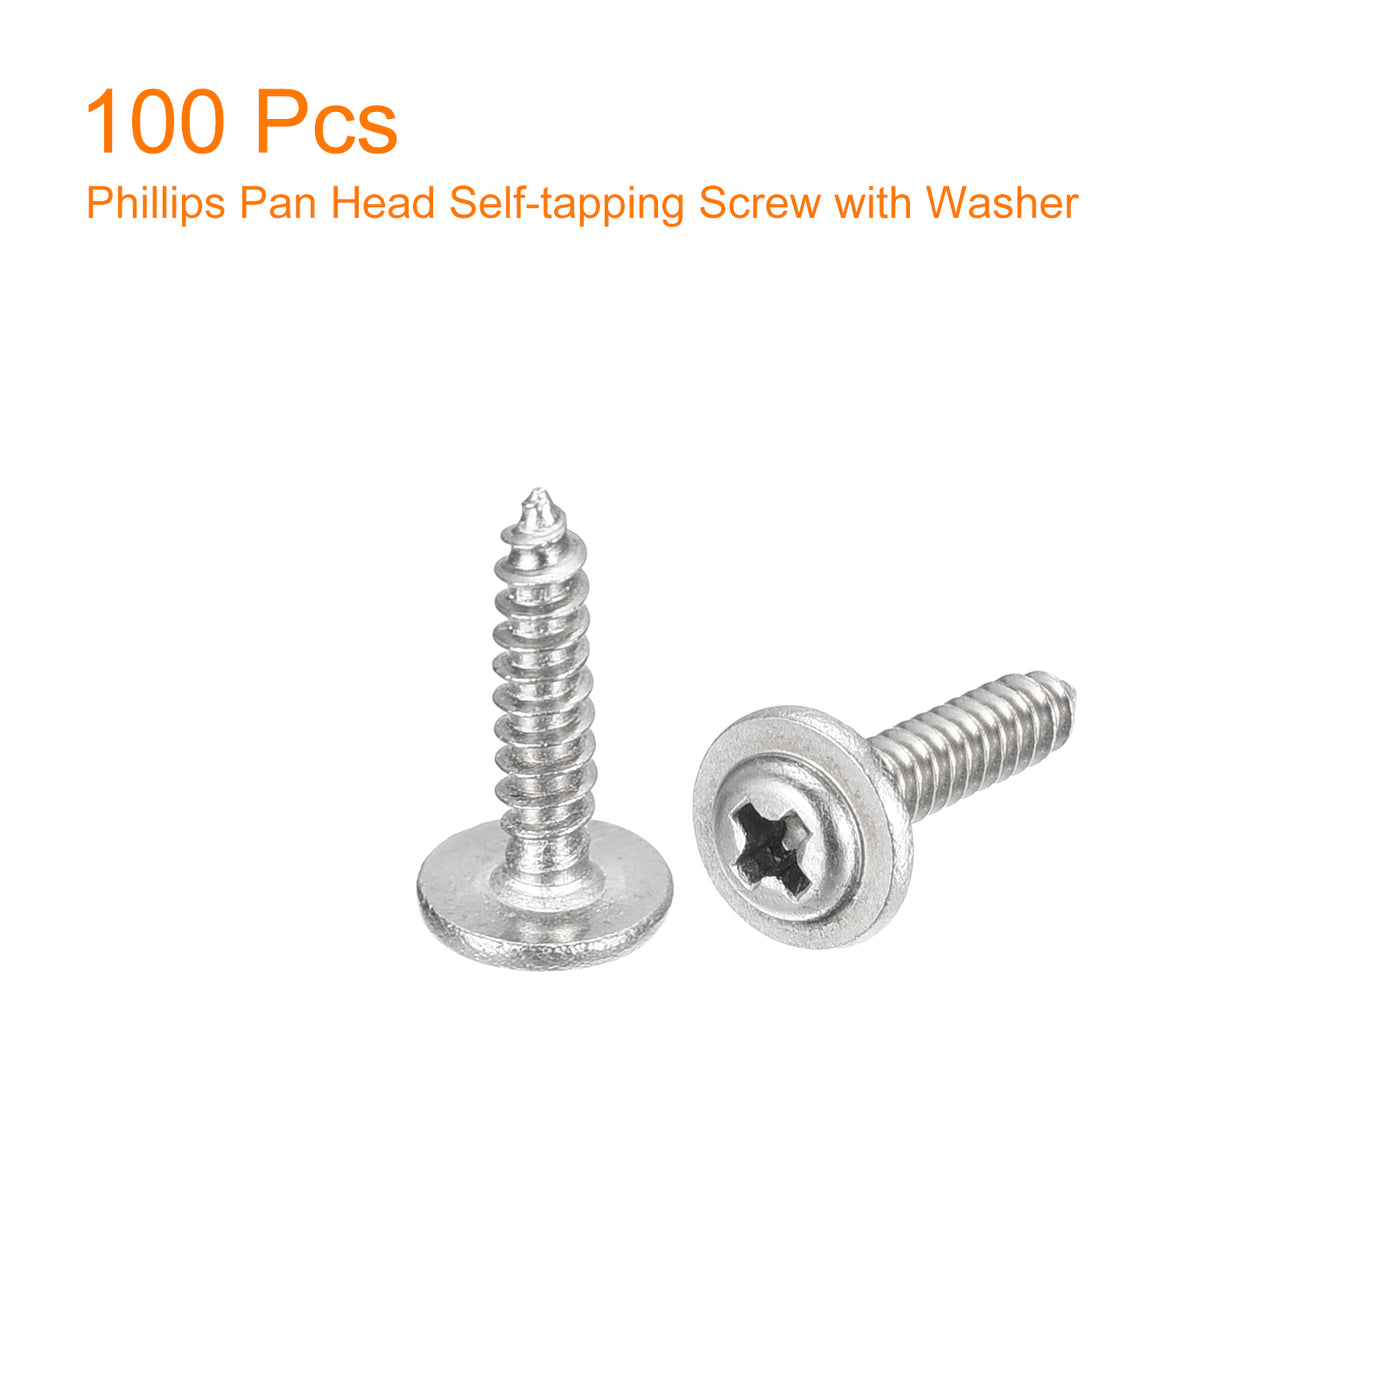 uxcell Uxcell ST2.3x10mm Phillips Pan Head Self-tapping Screw with Washer, 100pcs - 304 Stainless Steel Wood Screw Full Thread (Silver)